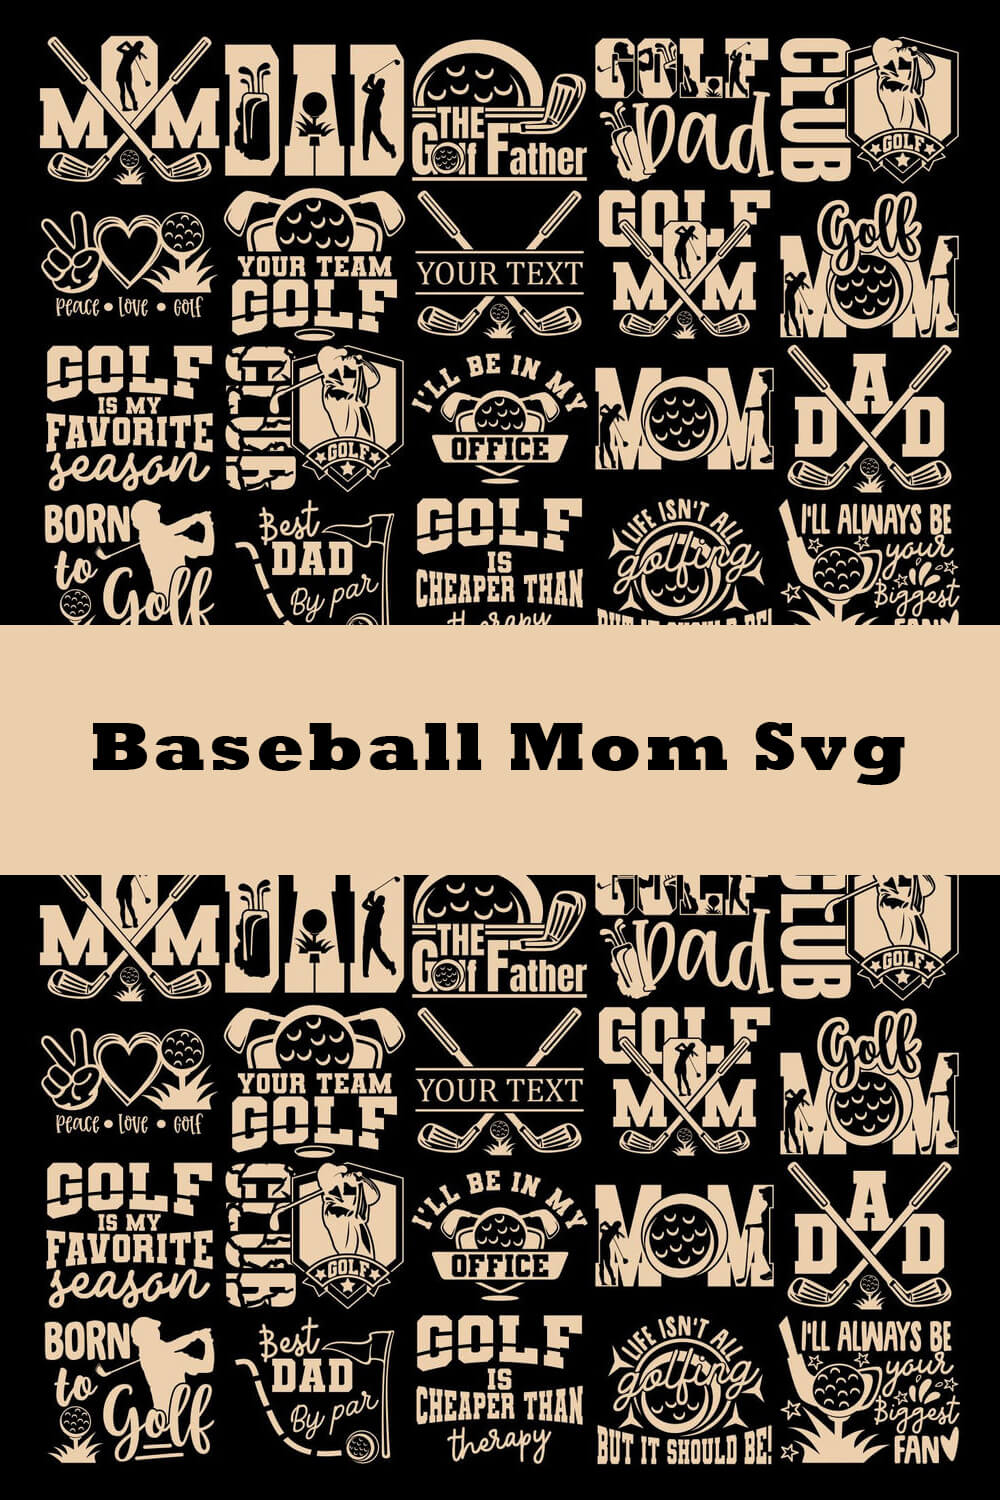 Inscription "Born to golf" and other SVG Bundle.